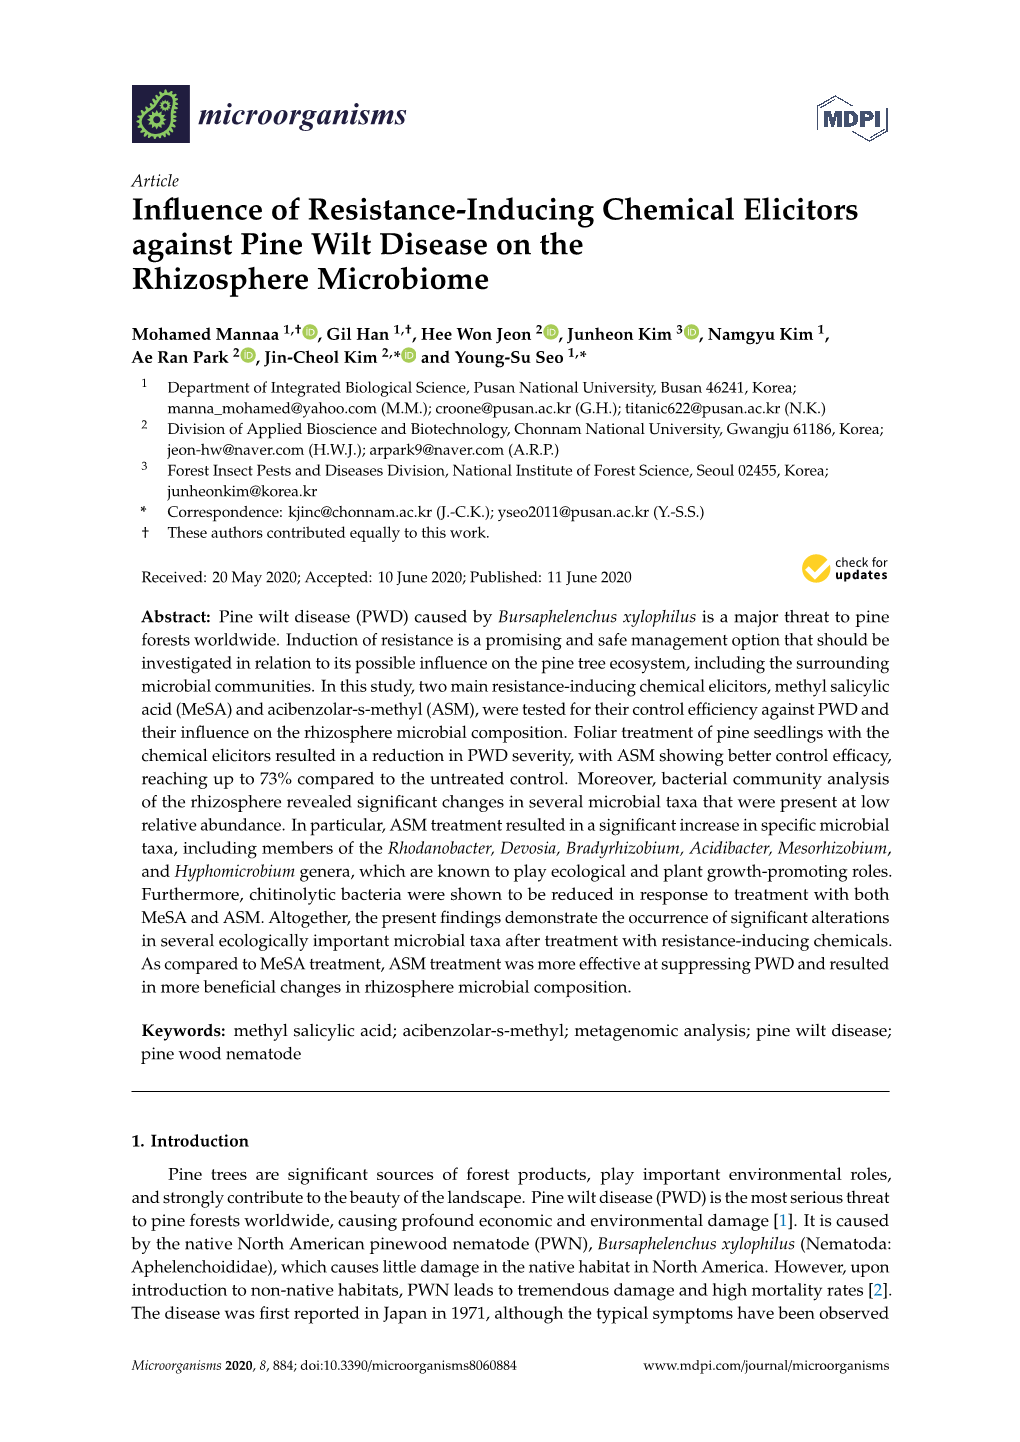 Influence of Resistance-Inducing Chemical Elicitors Against Pine Wilt